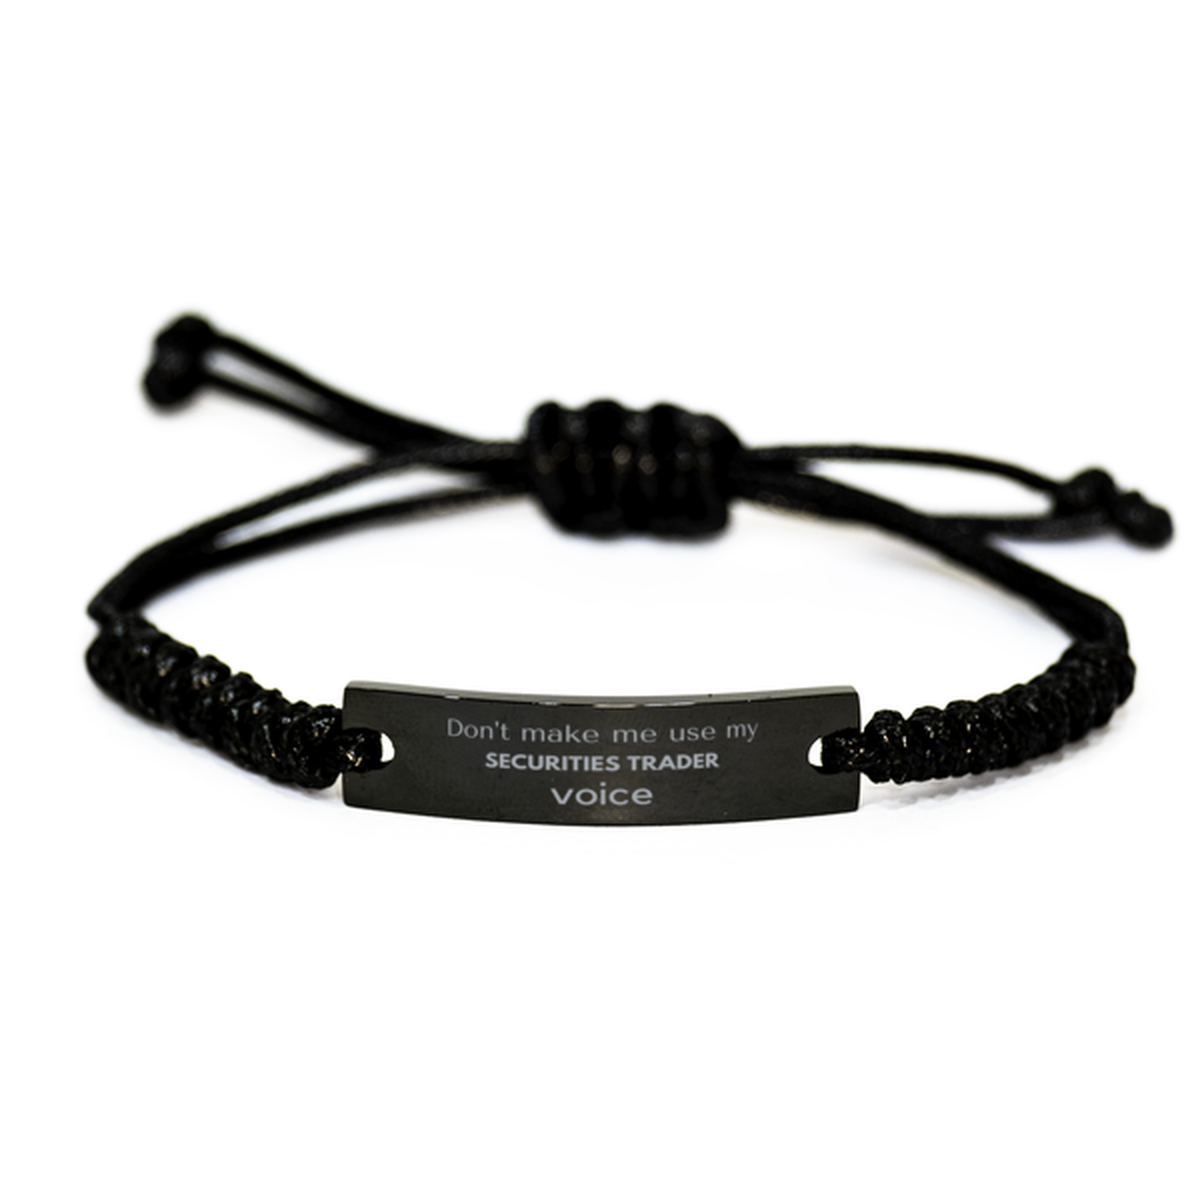 Don't make me use my Securities Trader voice, Sarcasm Securities Trader Gifts, Christmas Securities Trader Black Rope Bracelet Birthday Unique Gifts For Securities Trader Coworkers, Men, Women, Colleague, Friends